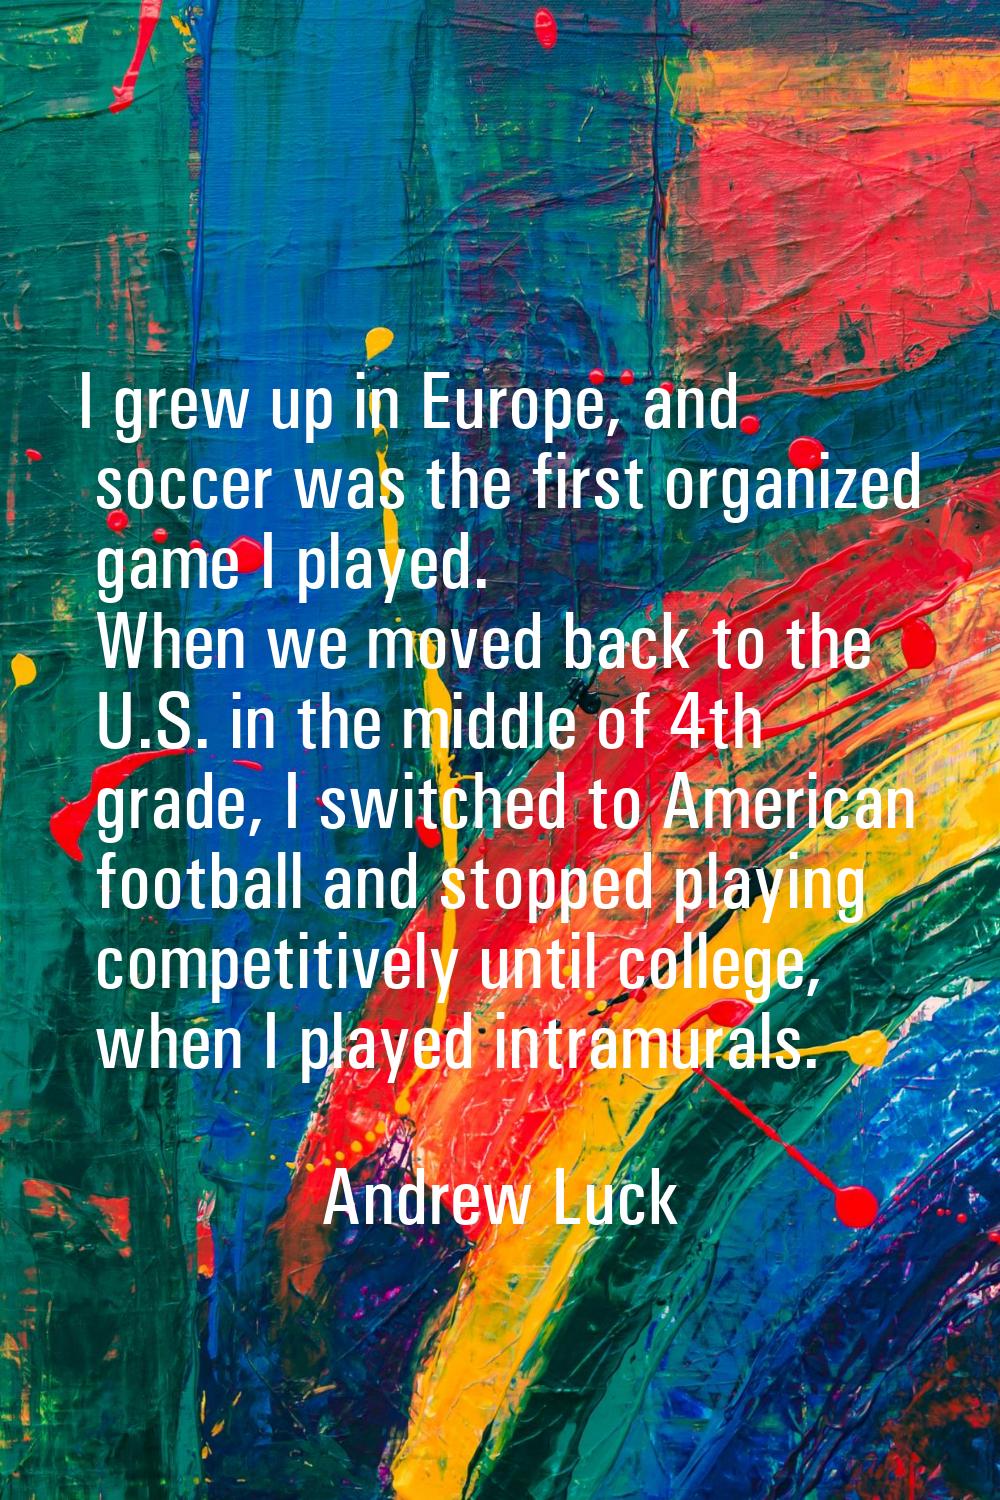 I grew up in Europe, and soccer was the first organized game I played. When we moved back to the U.